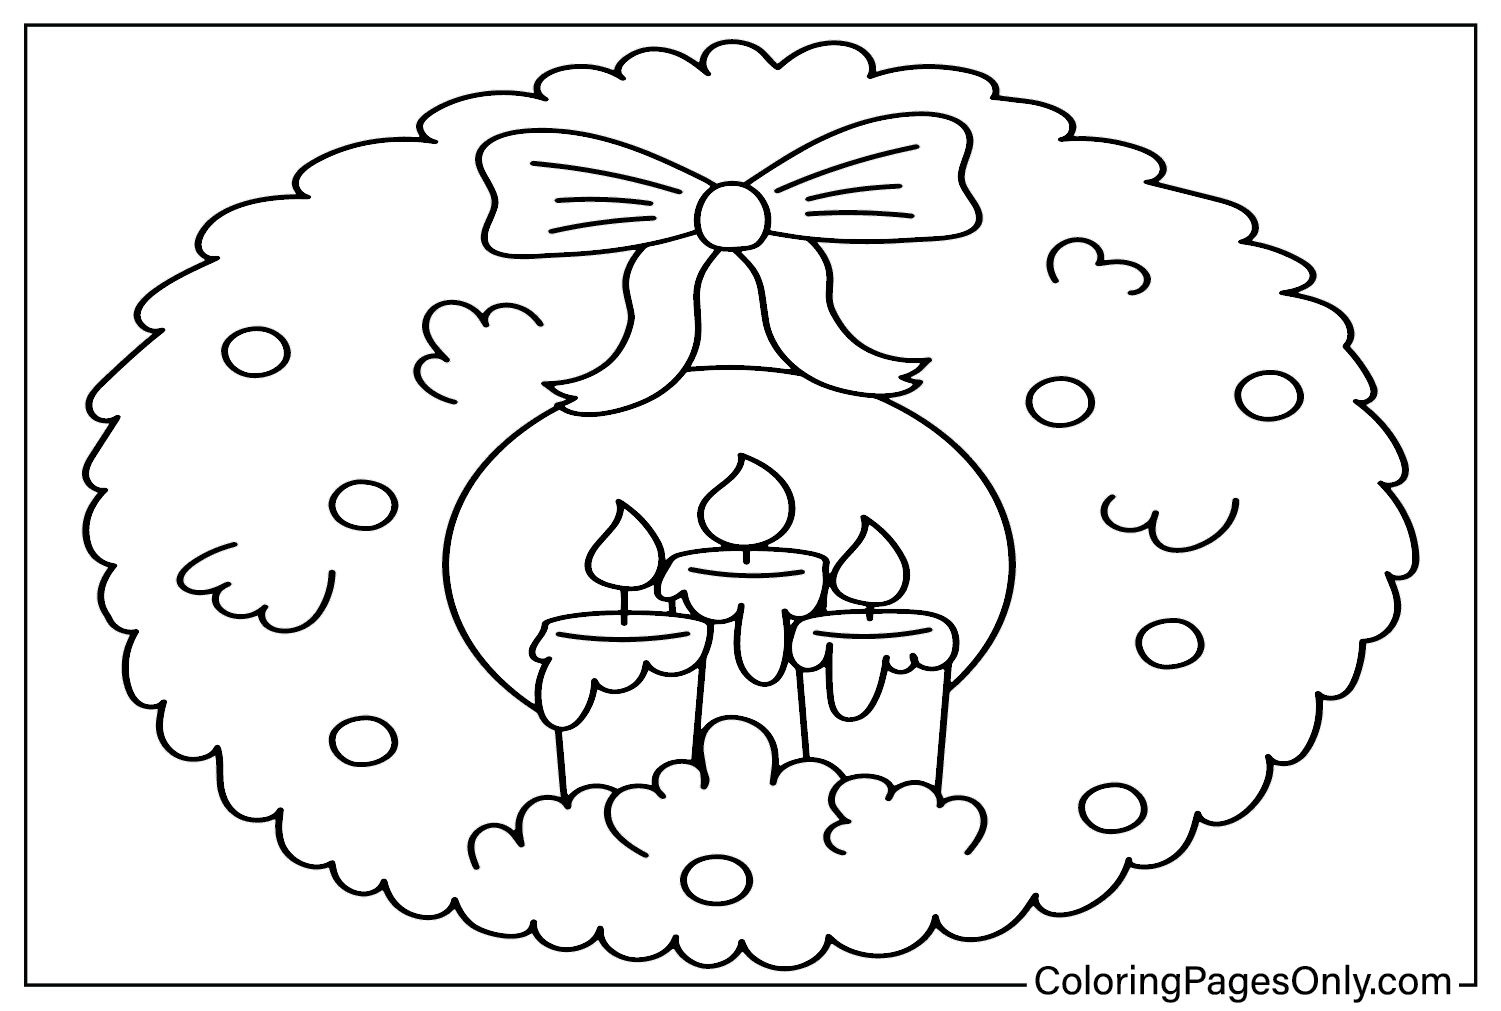 Advent Wreath Coloring Page to Print from Advent Wreath